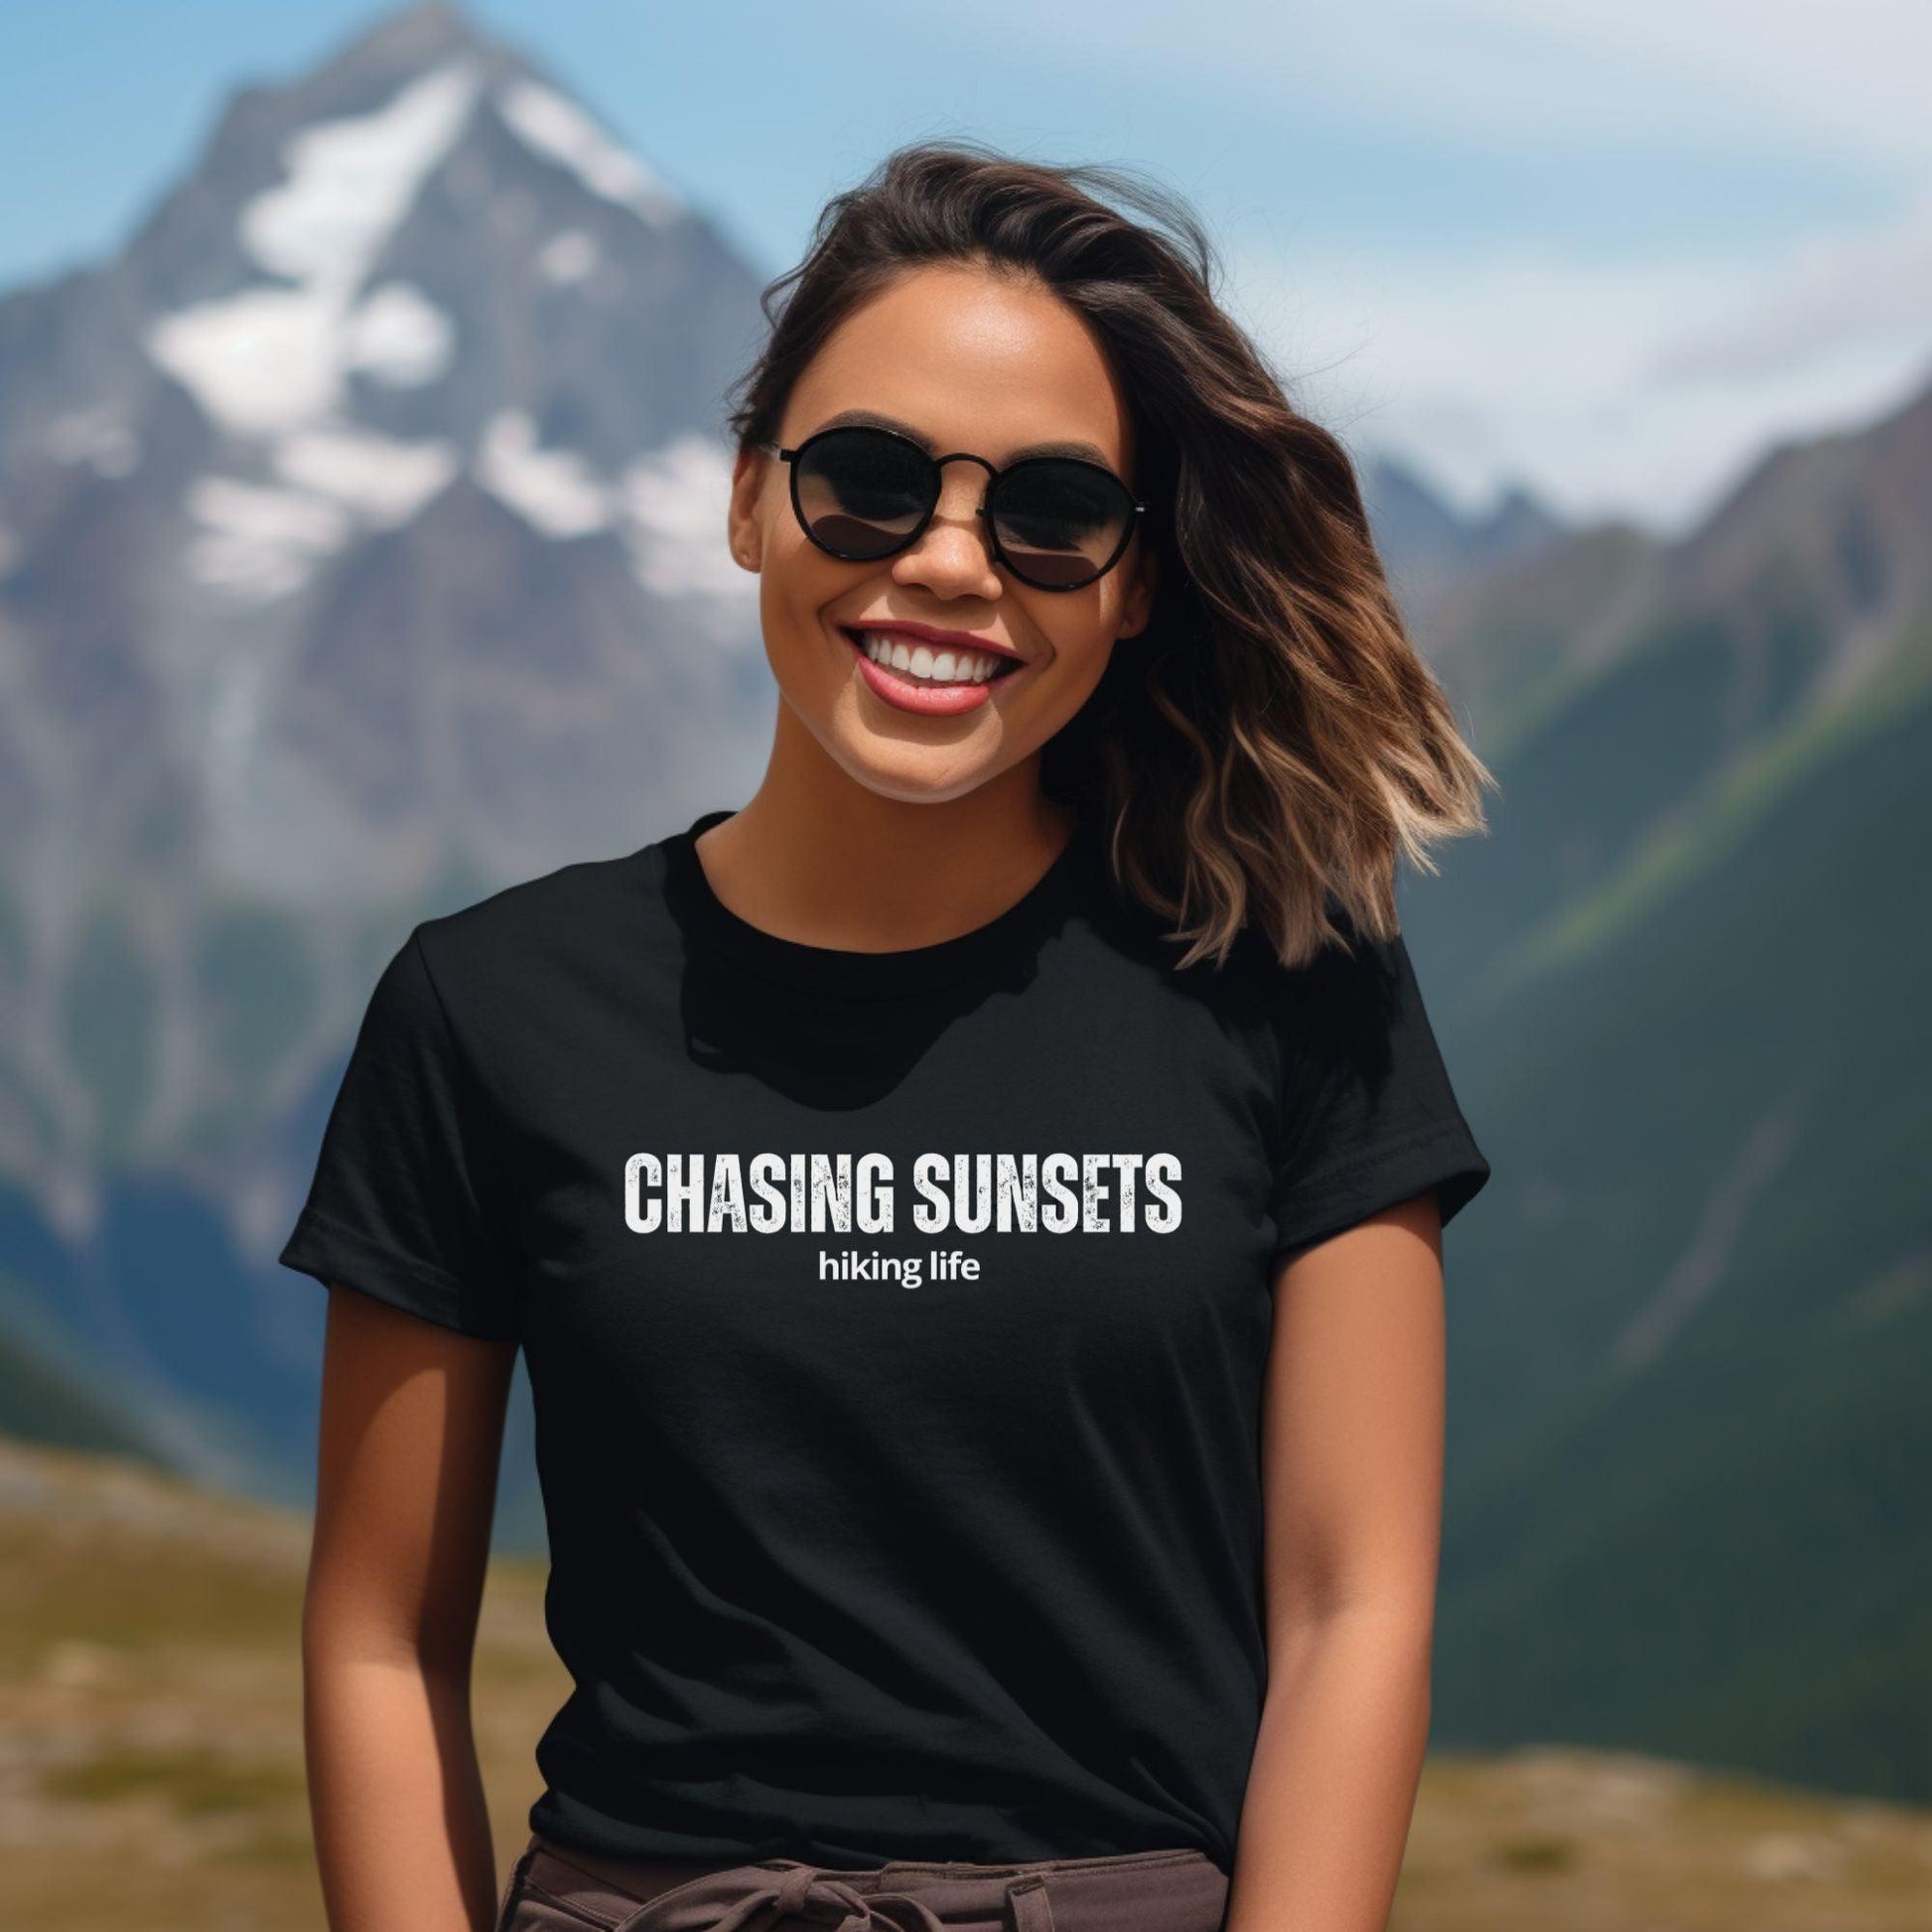 Chasing Sunsets T-Shirt - Adventure Threads Company